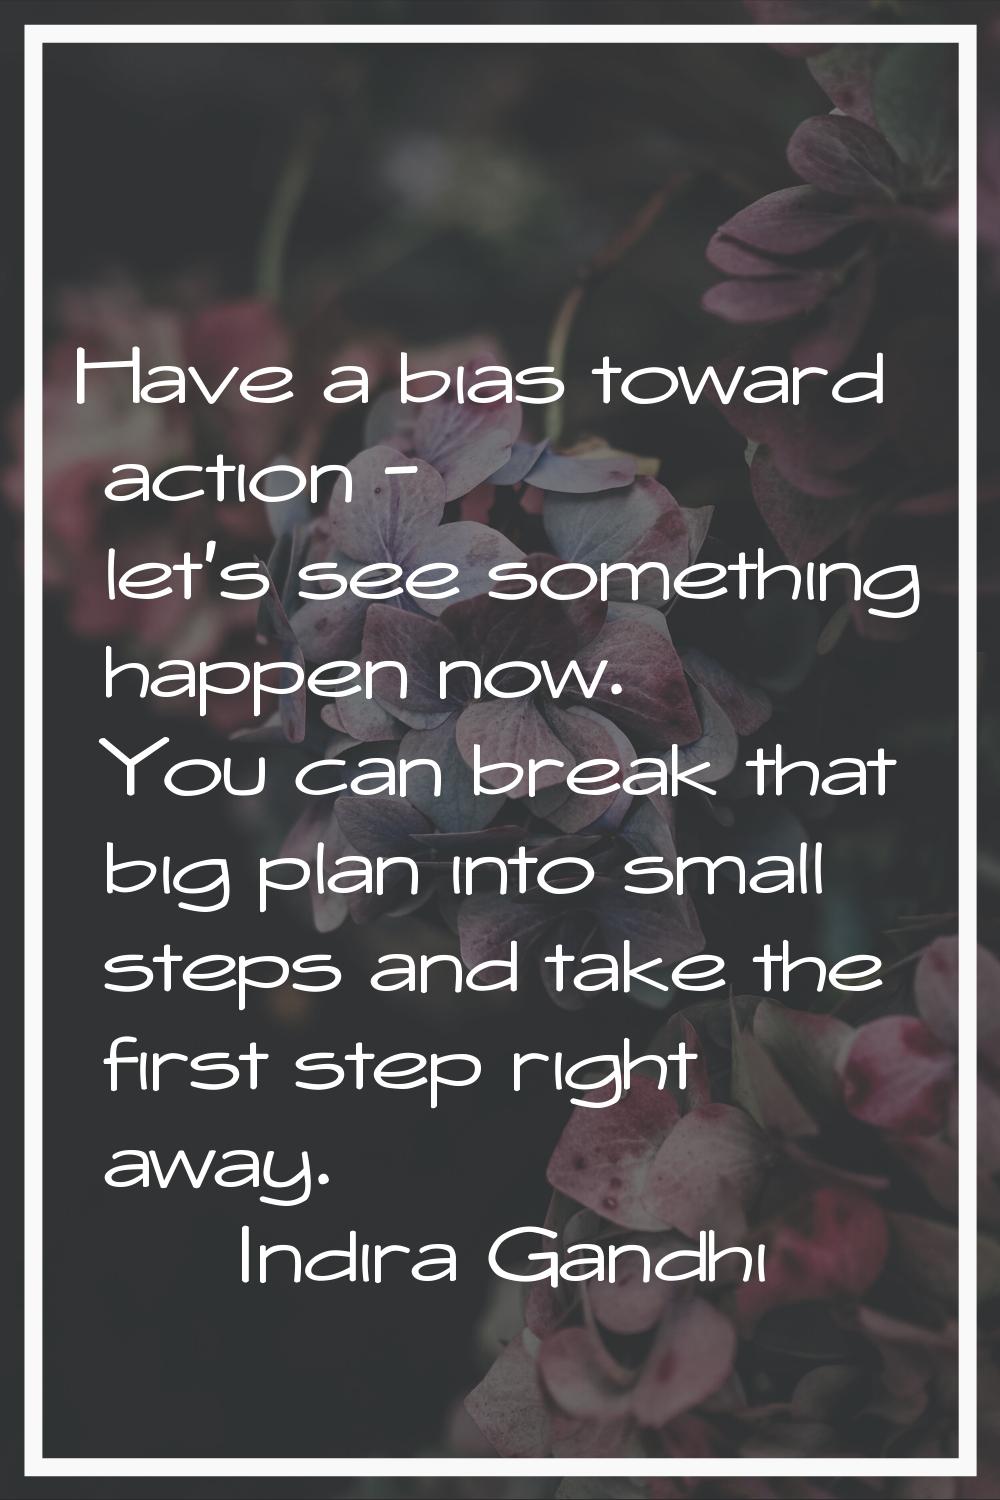 Have a bias toward action - let's see something happen now. You can break that big plan into small 